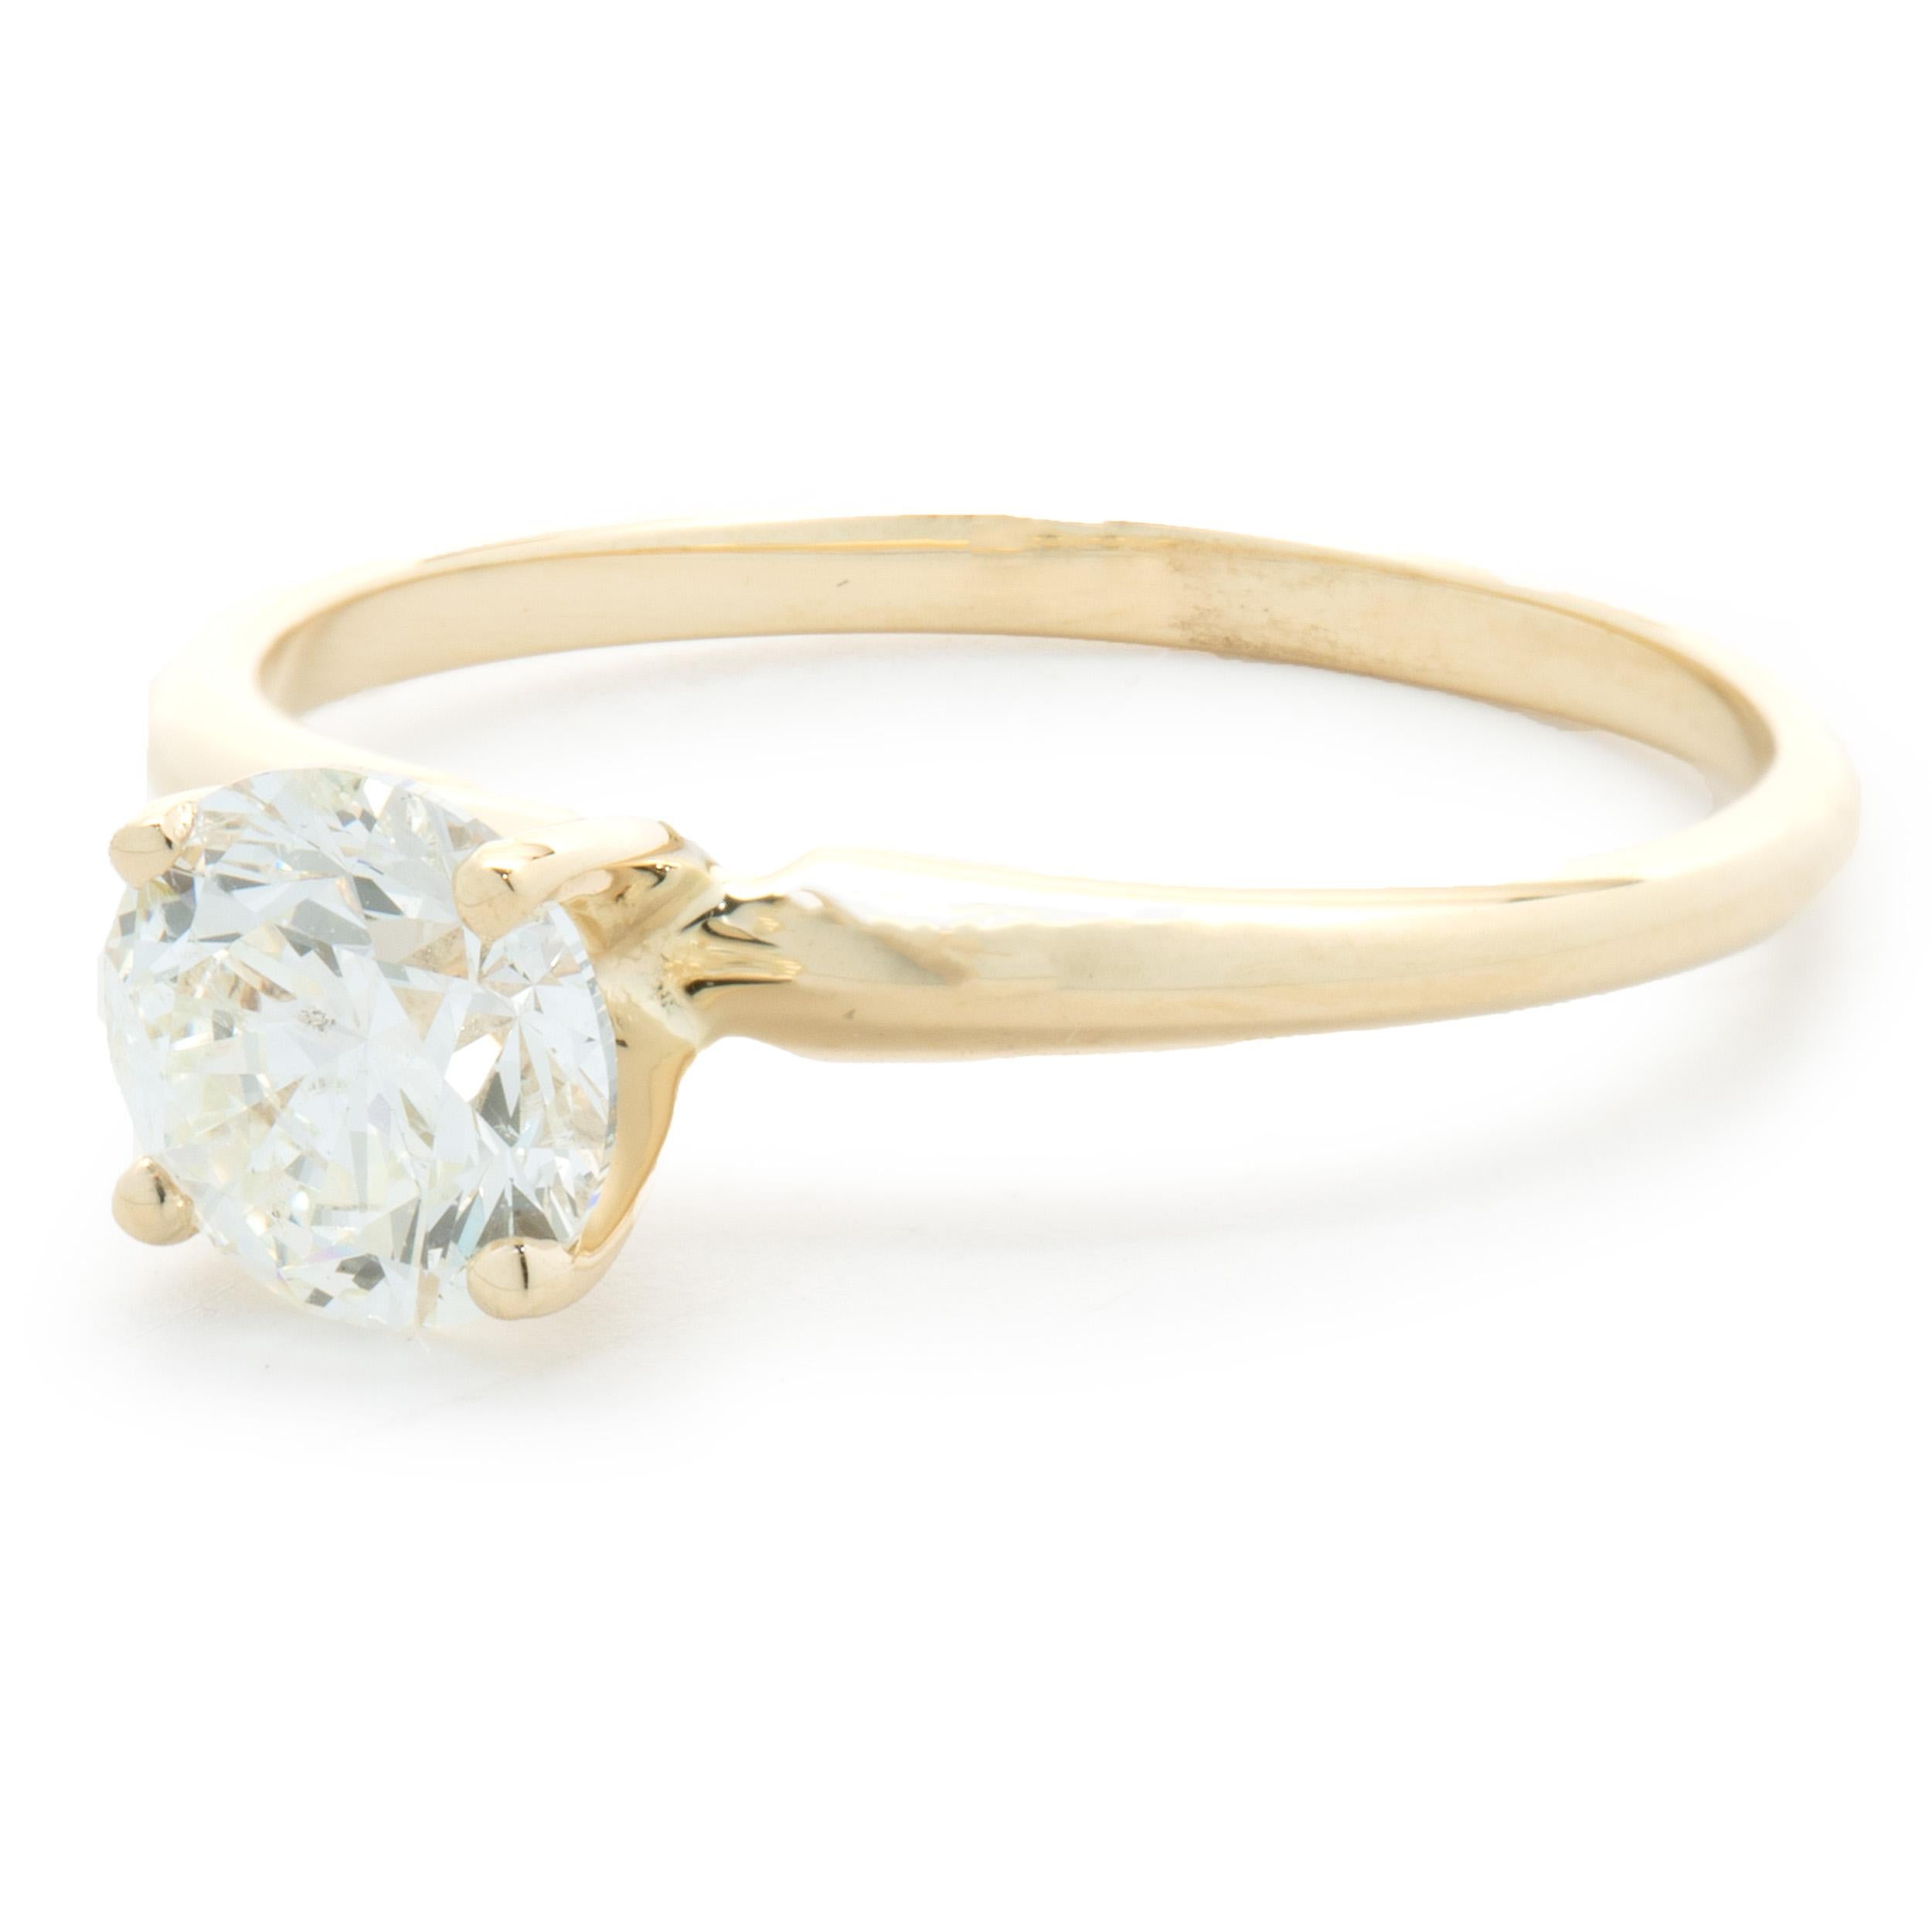 Designer: custom
Material: 14K yellow gold
Diamond:  1 round brilliant cut = 1.01ct
Color: J
Clarity: I1
GIA: 1379709771
Dimensions: ring top measures 6.5mm wide
Ring Size: 7 (complimentary sizing available)
Weight: 1.89 grams